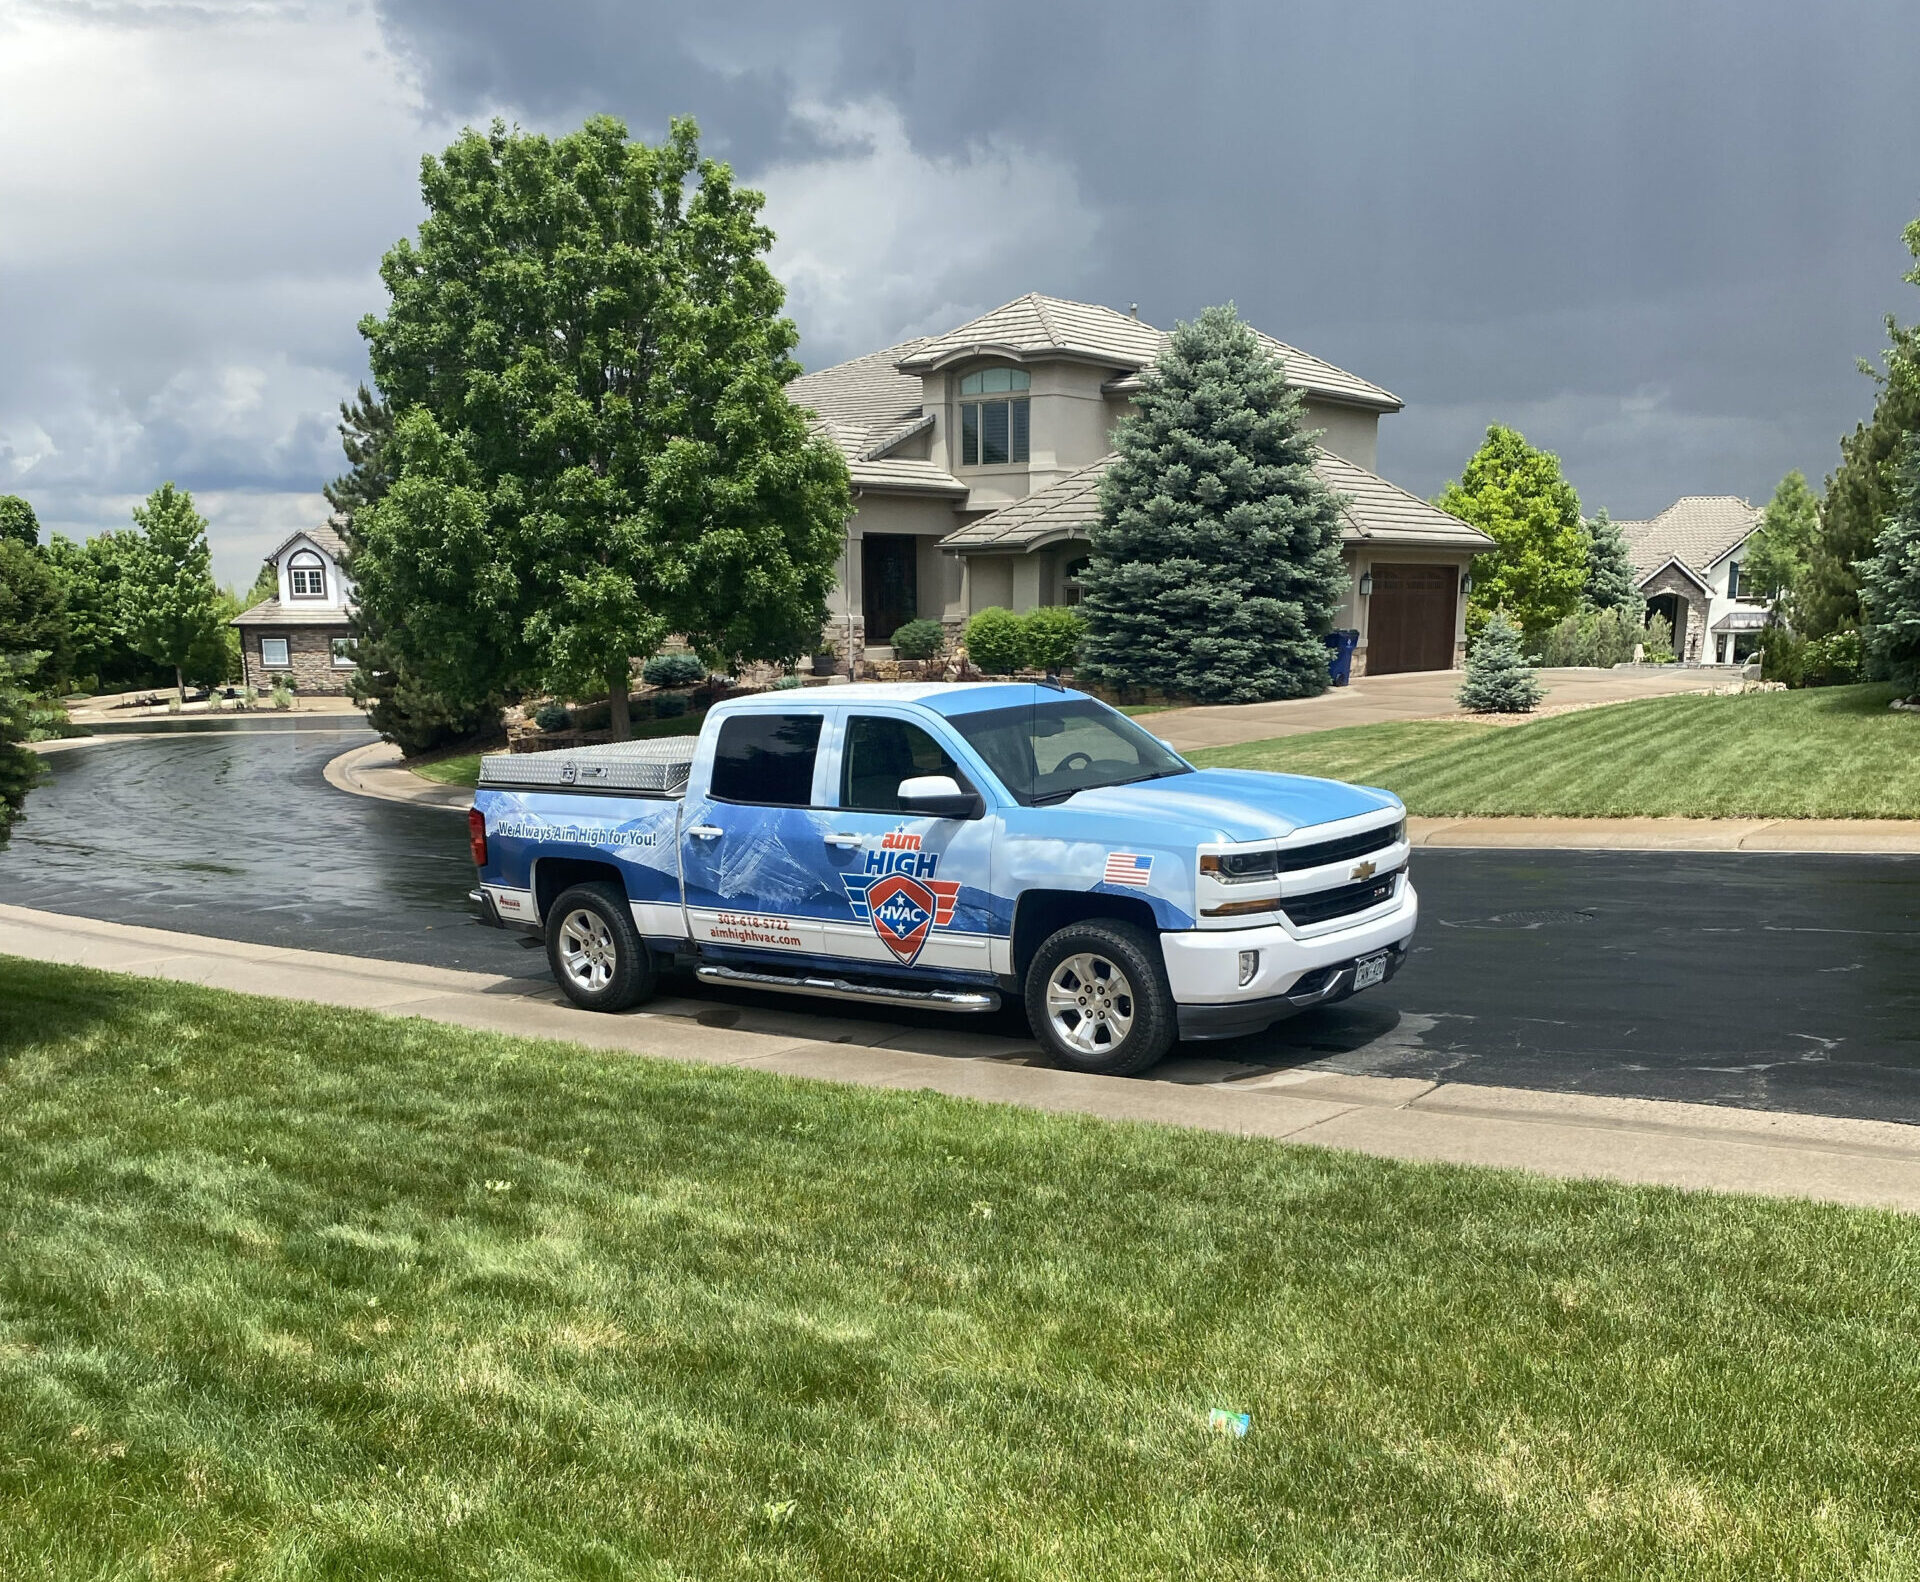 Aim High HVAC - Heating and Cooling Services in Littleton, CO